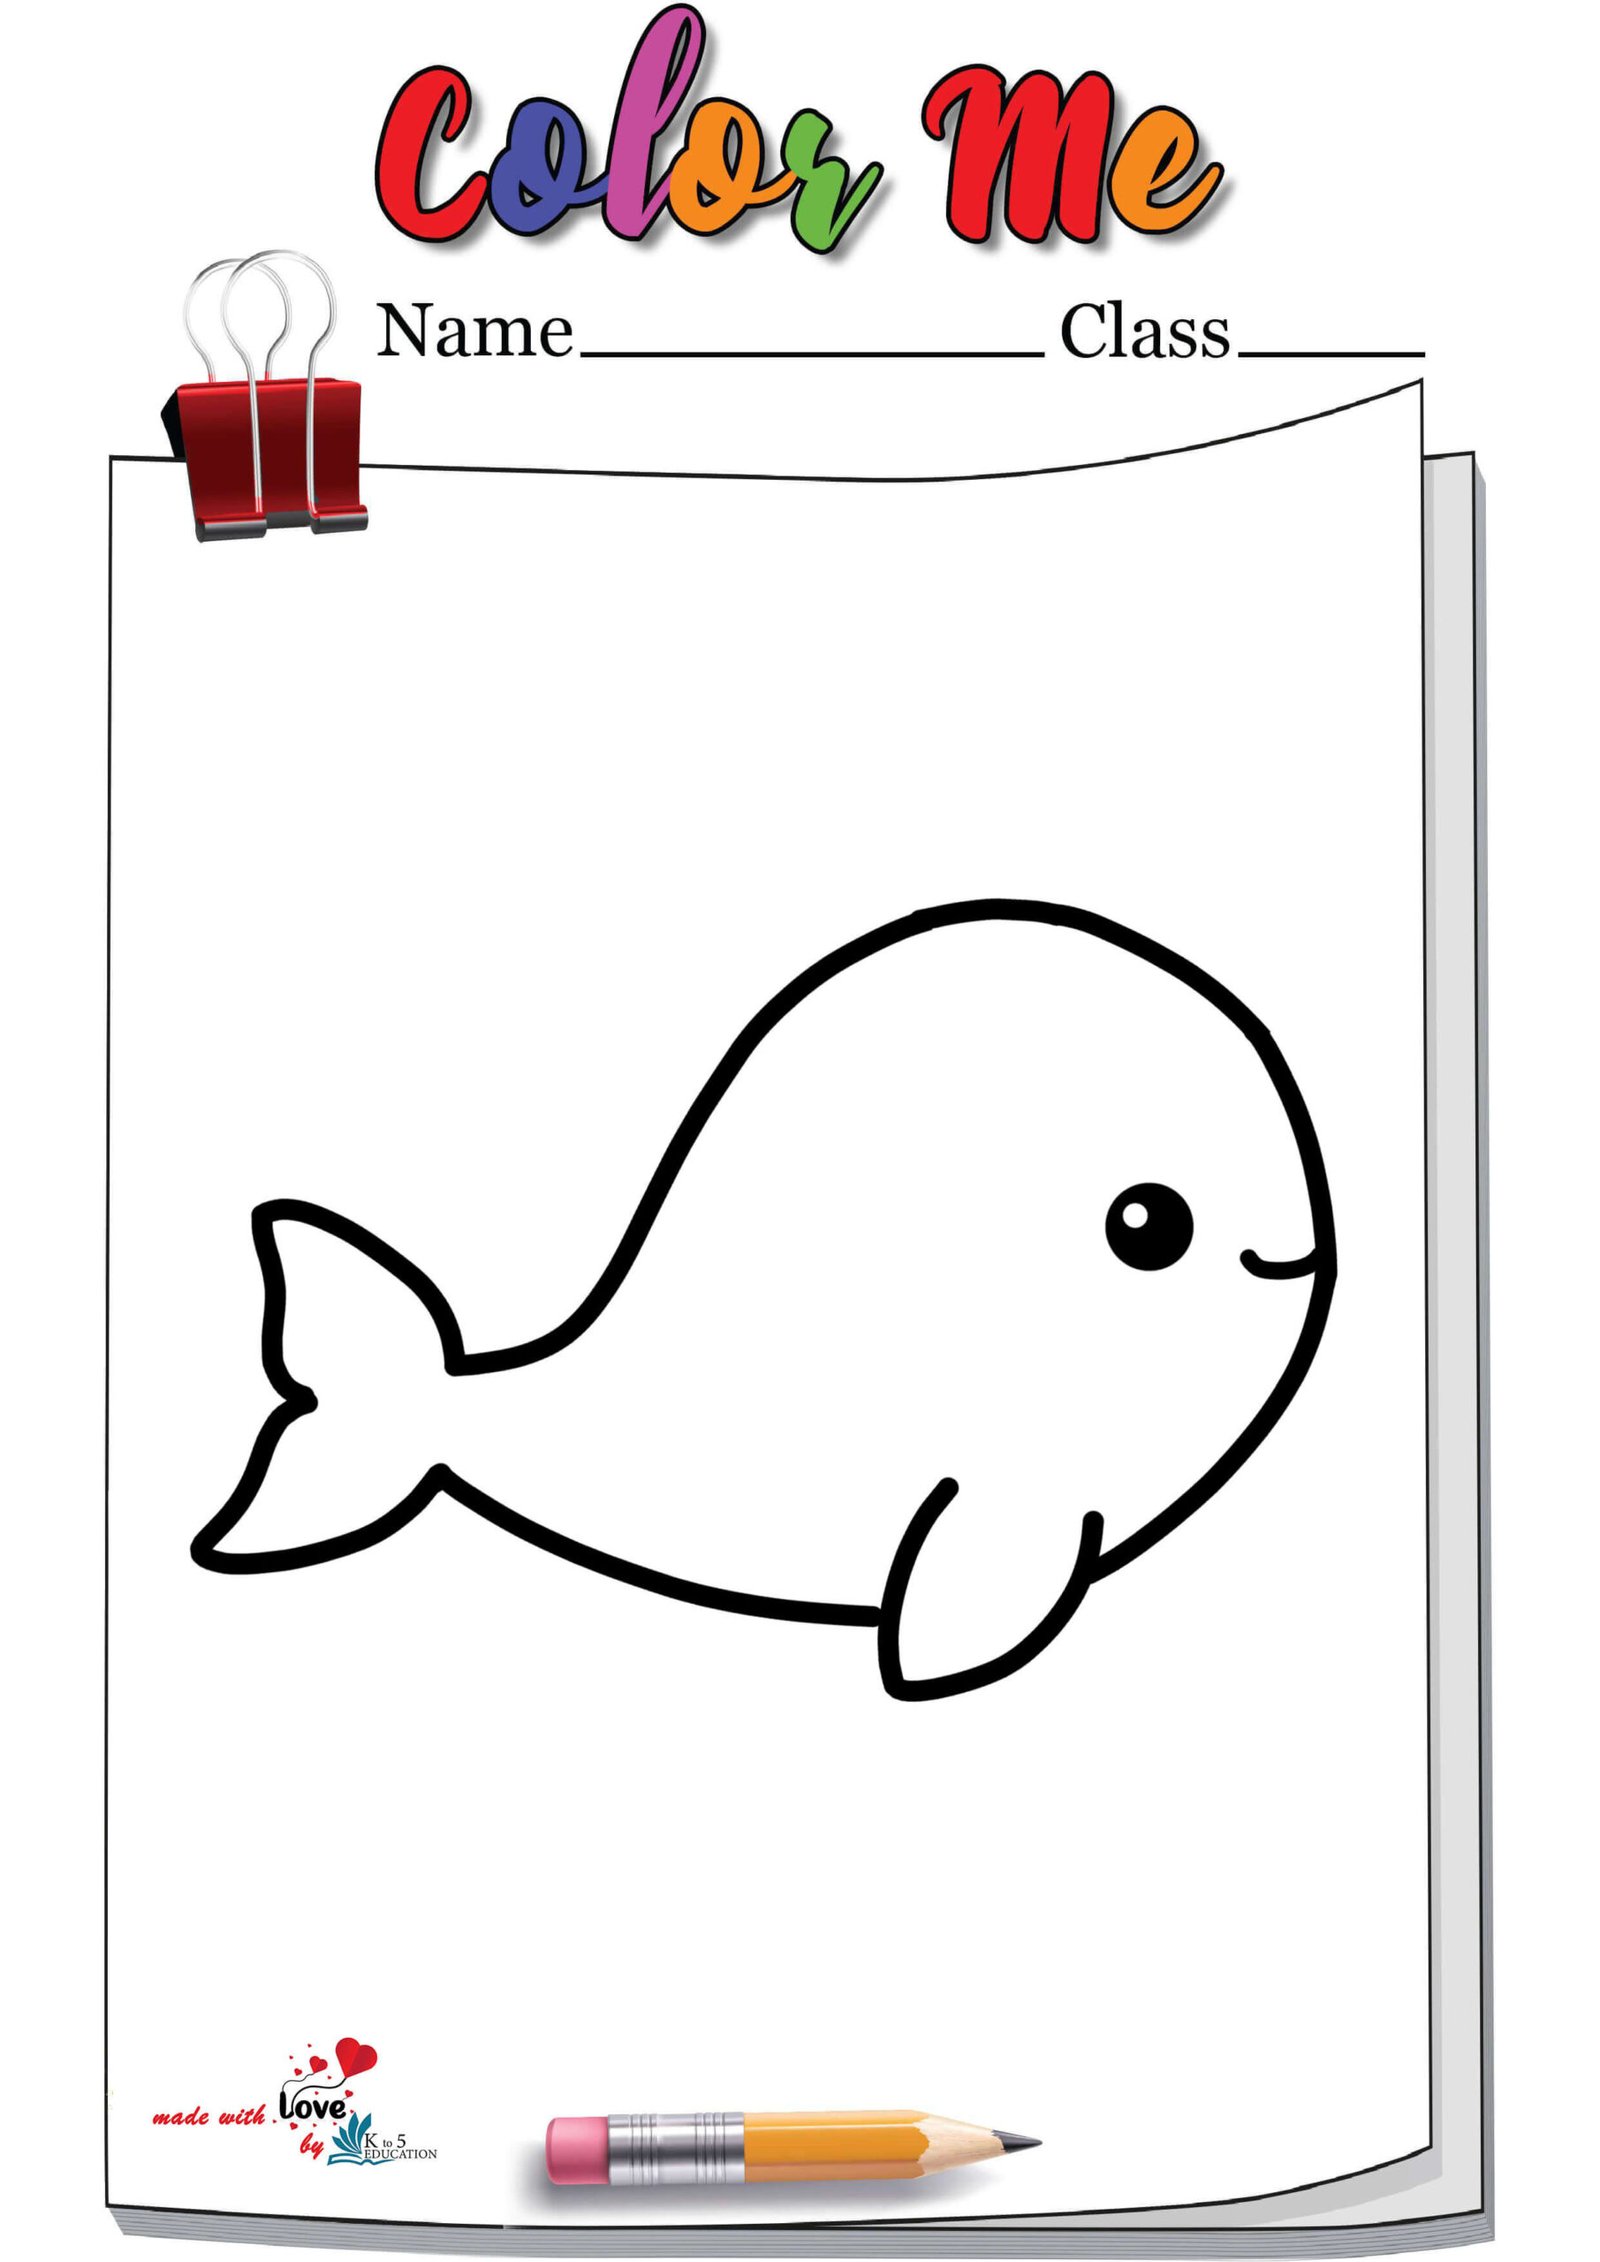 Cute Cartoon Whale Coloring Page